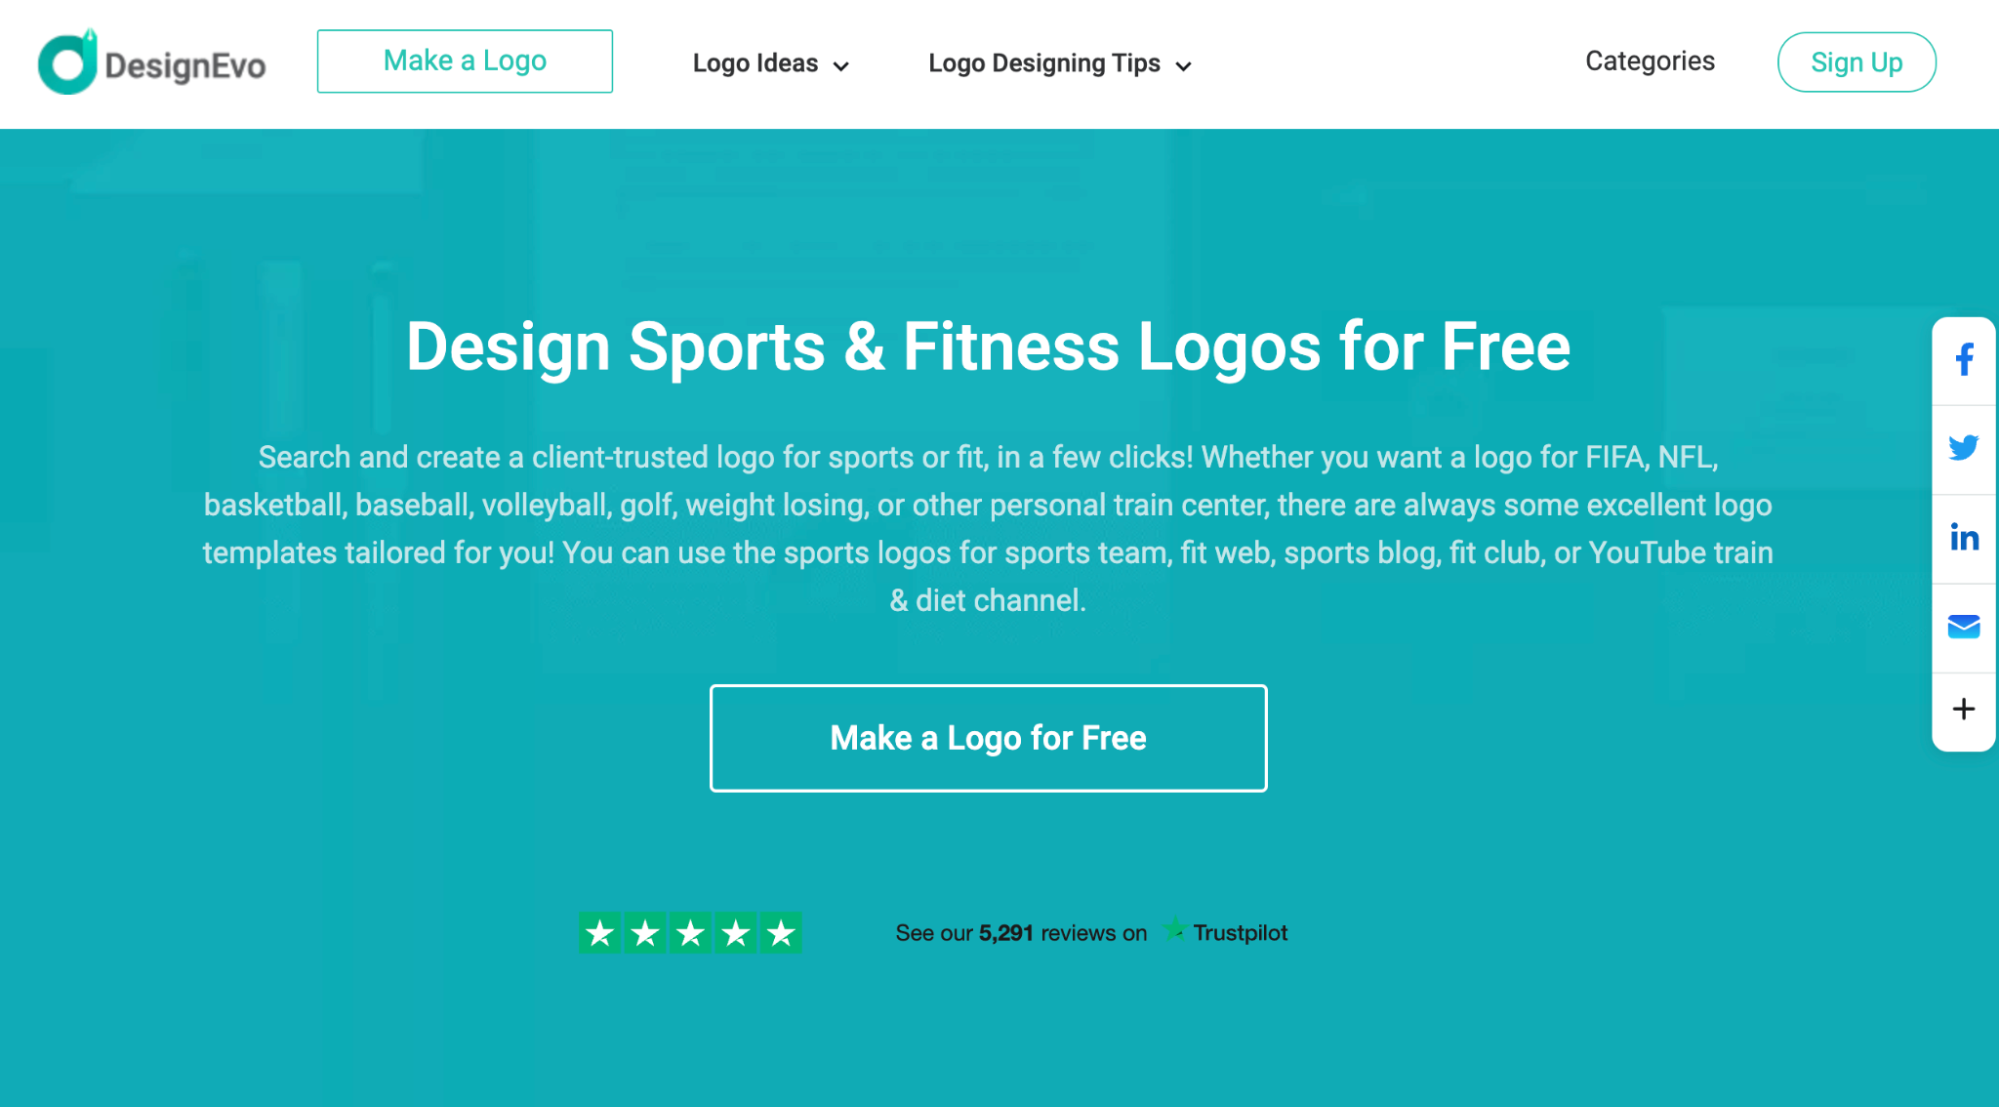 The Design Elements of Sports Logos